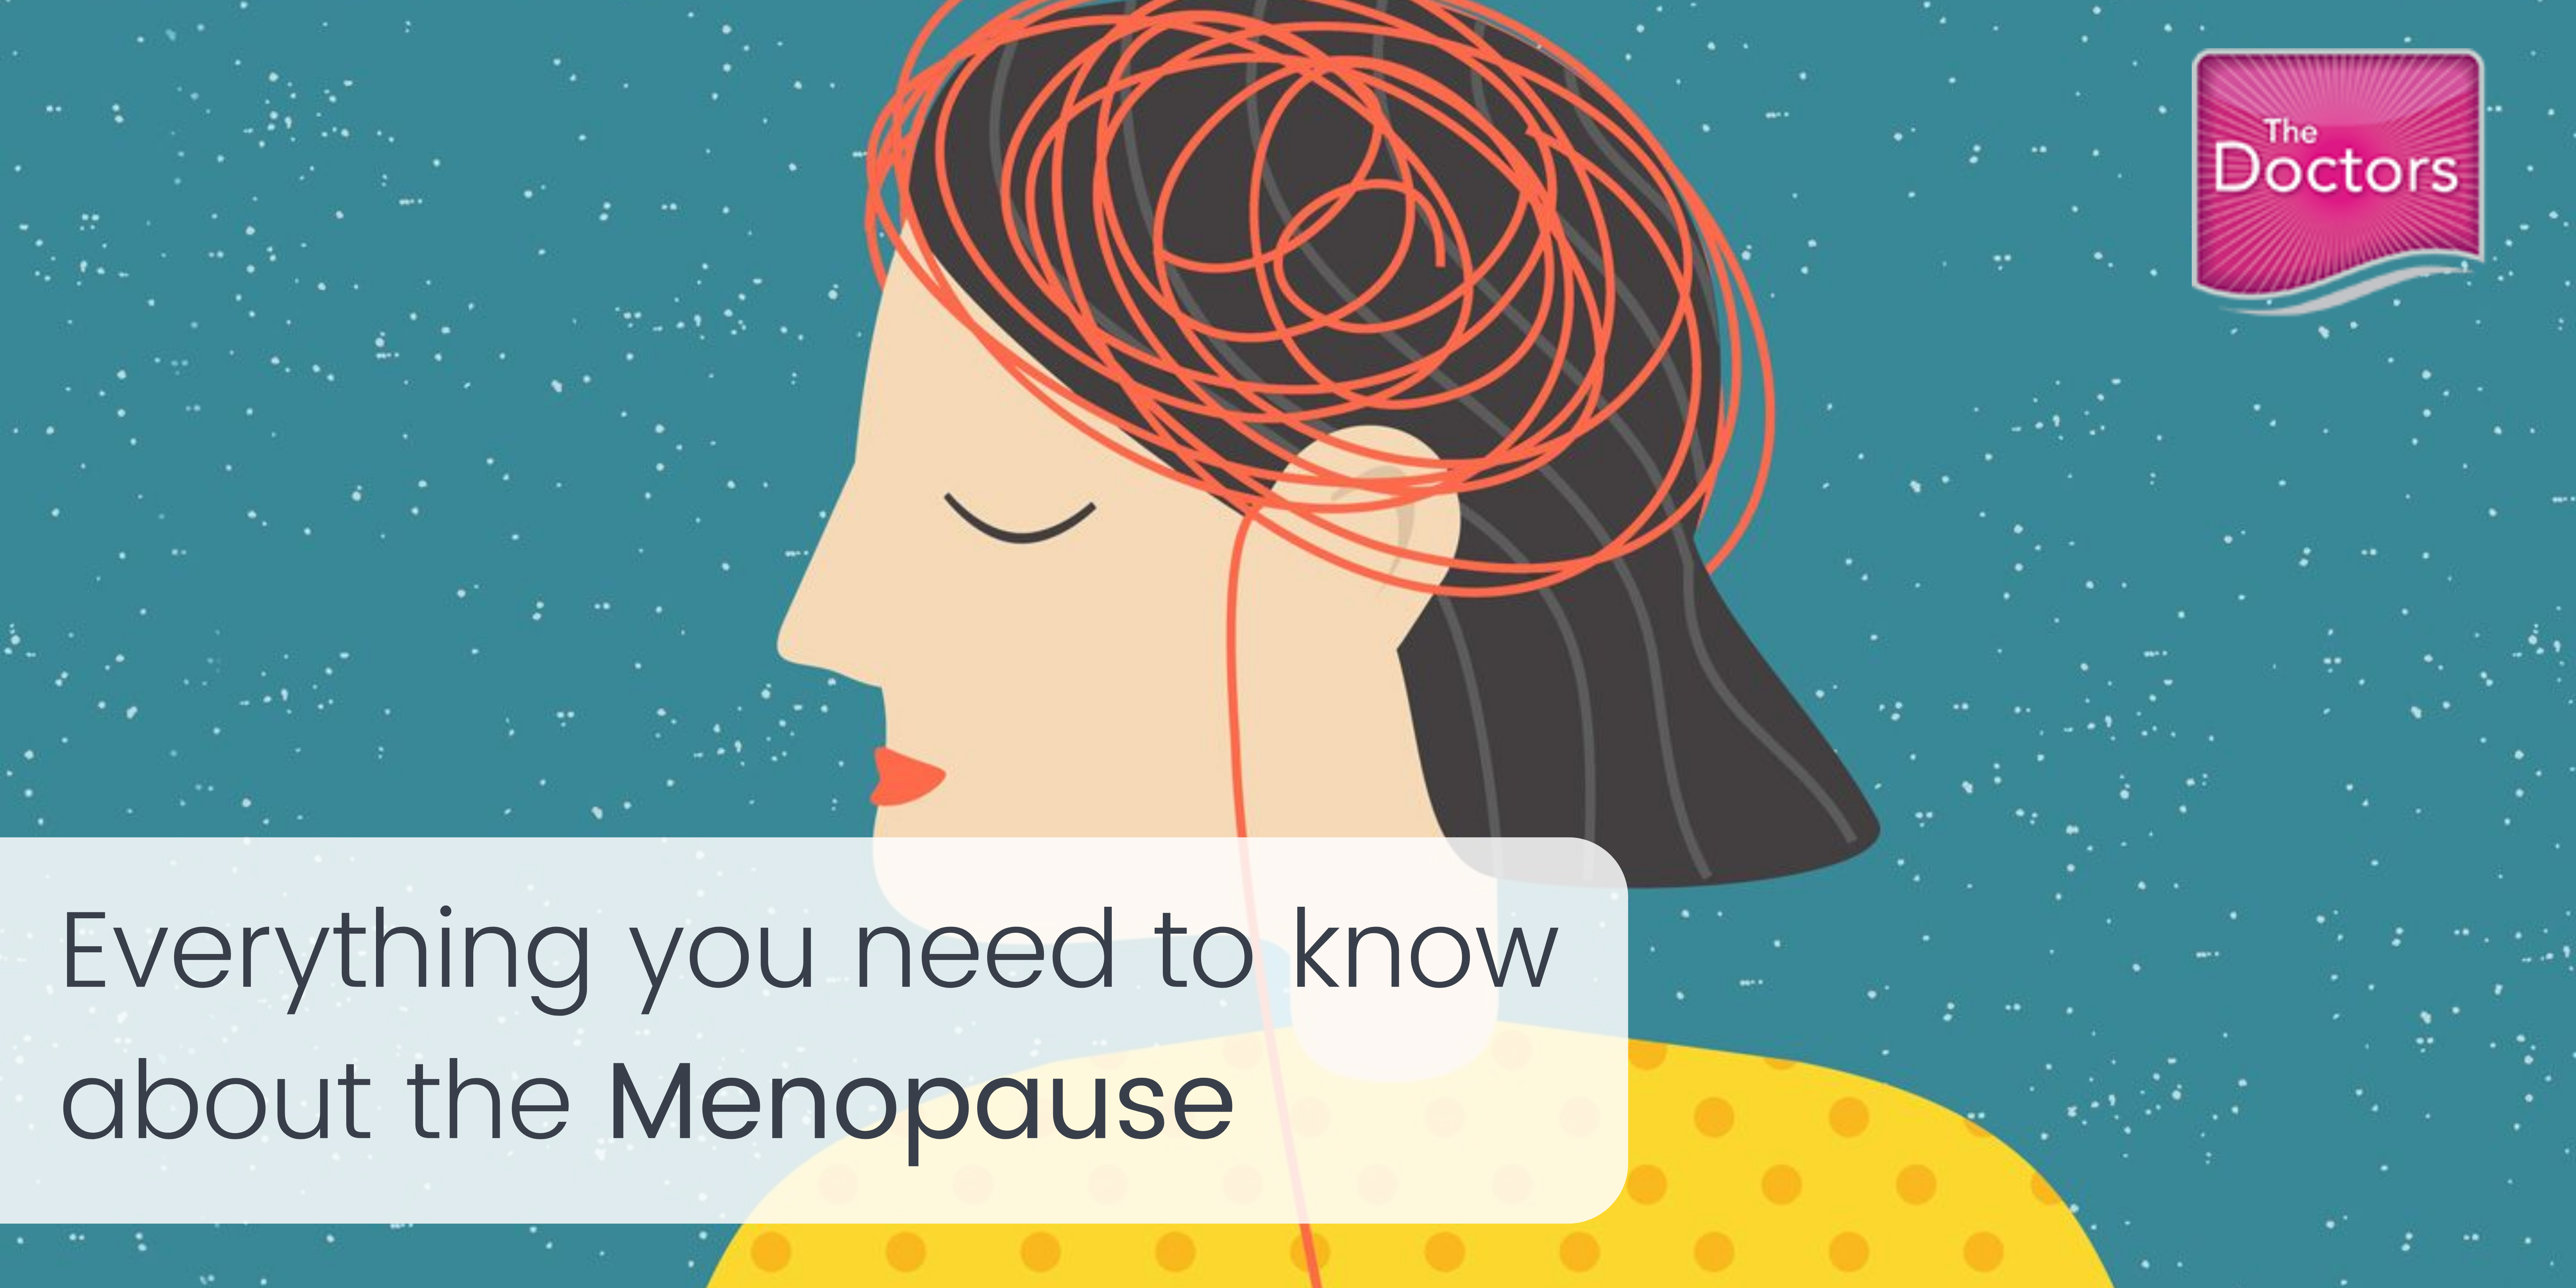 Every thing you need to know about the menopause